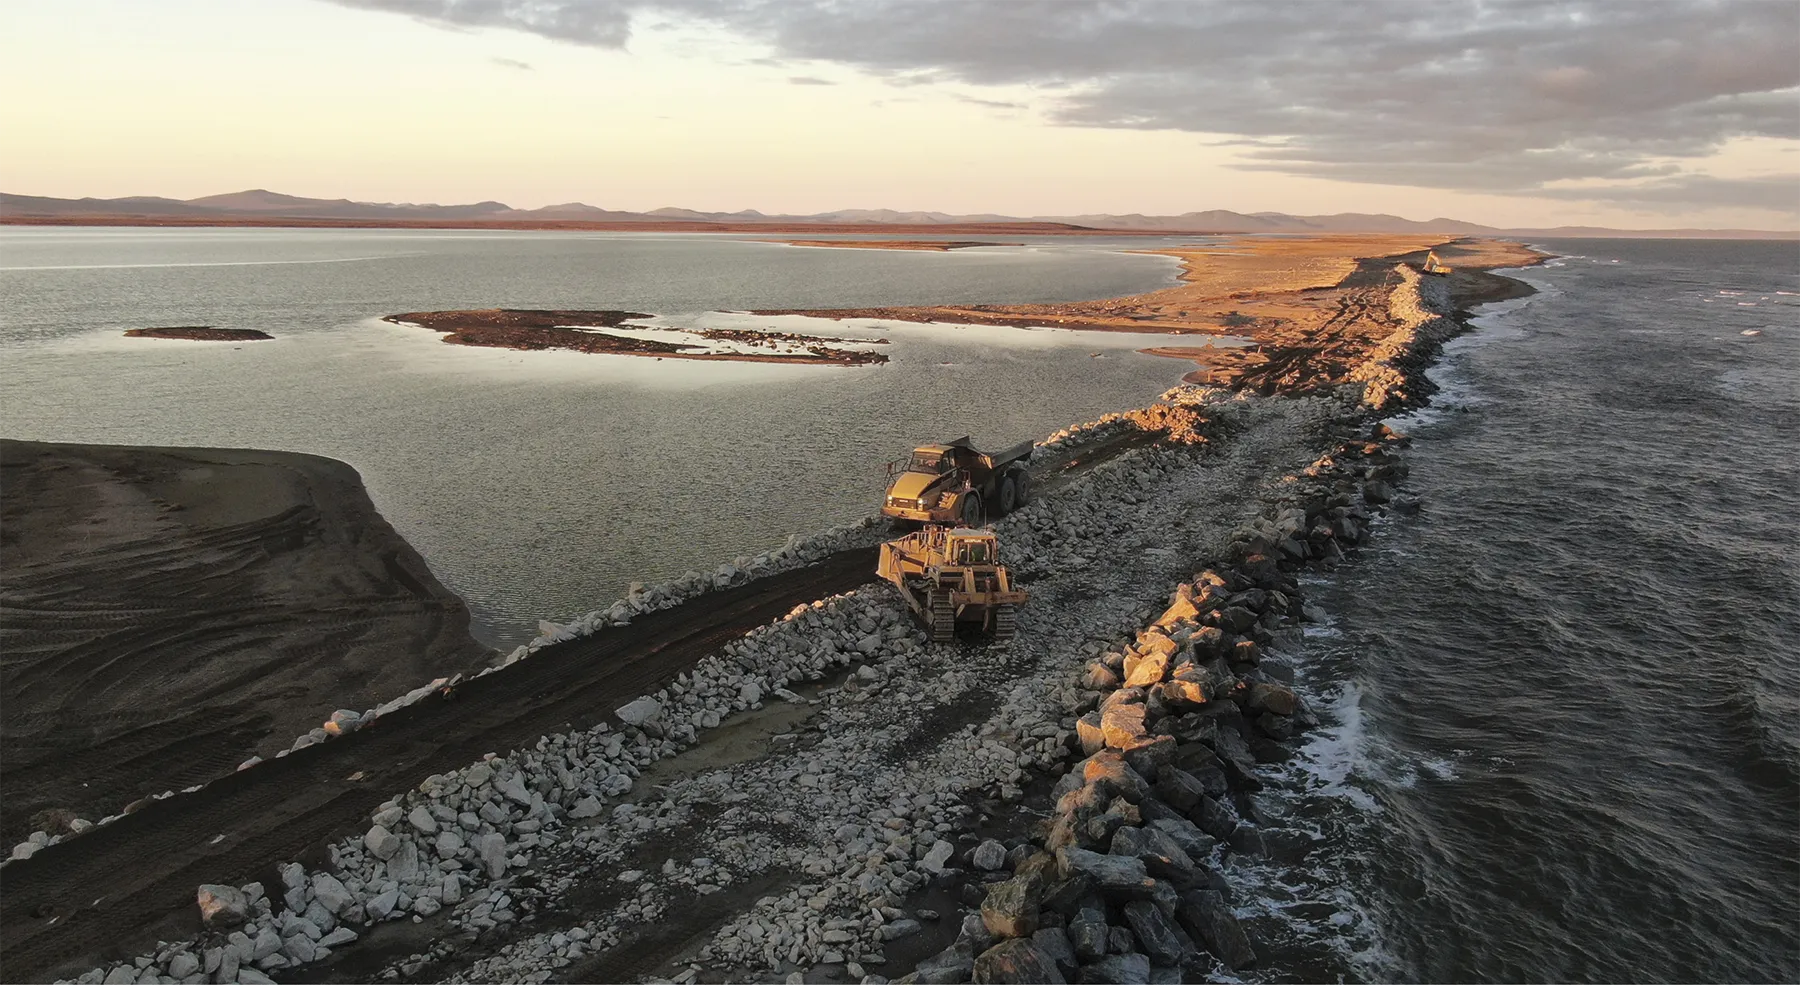 Knik Construction worked with the Alaska Department of Transportation and Public Facilities to repair protective water berms destroyed by Typhoon Merbok. These berms provide flood defense and prevent coastal erosion.